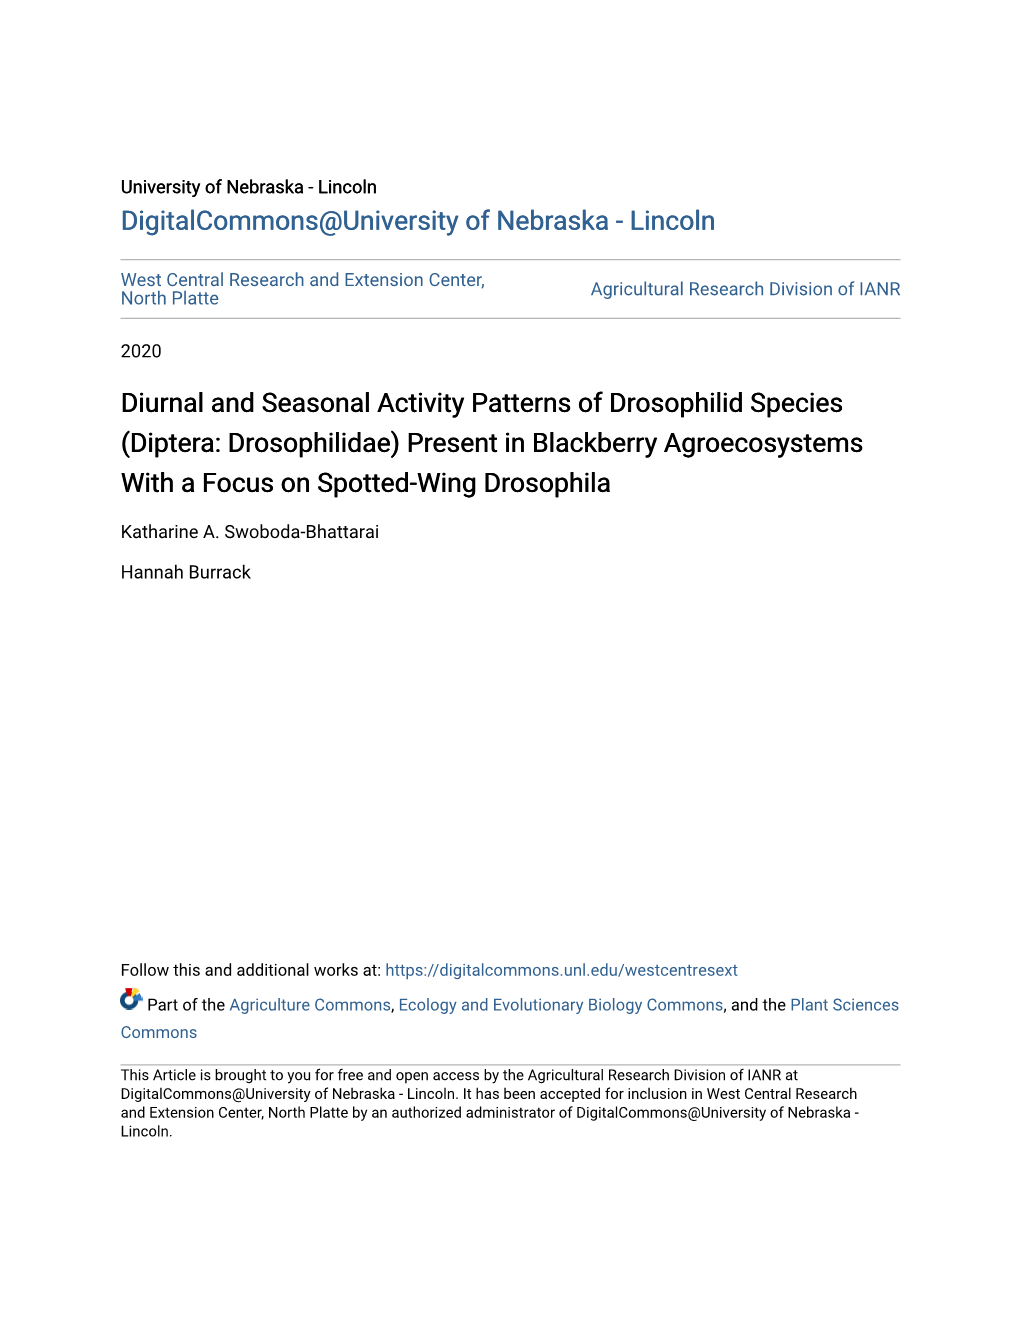 Diurnal and Seasonal Activity Patterns of Drosophilid Species (Diptera: Drosophilidae) Present in Blackberry Agroecosystems with a Focus on Spotted-Wing Drosophila